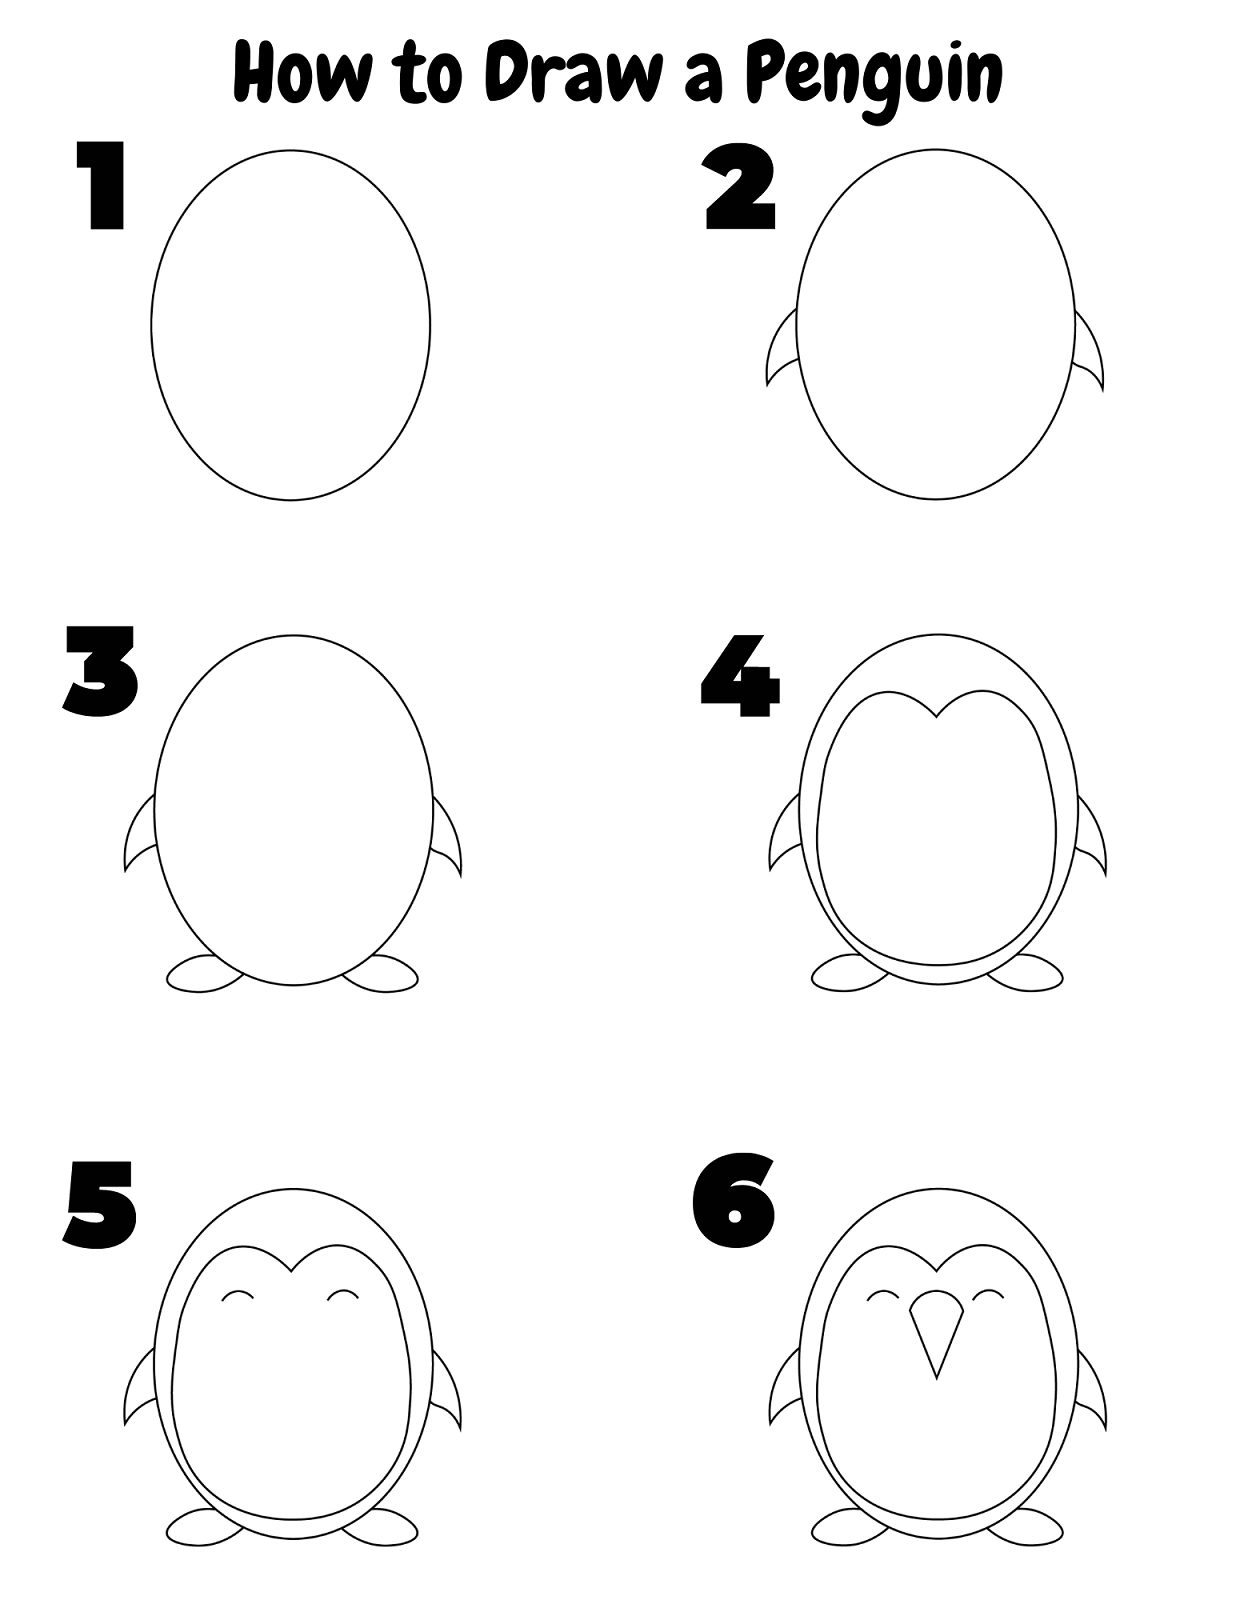 How to draw a penguin - step by step instruction for children